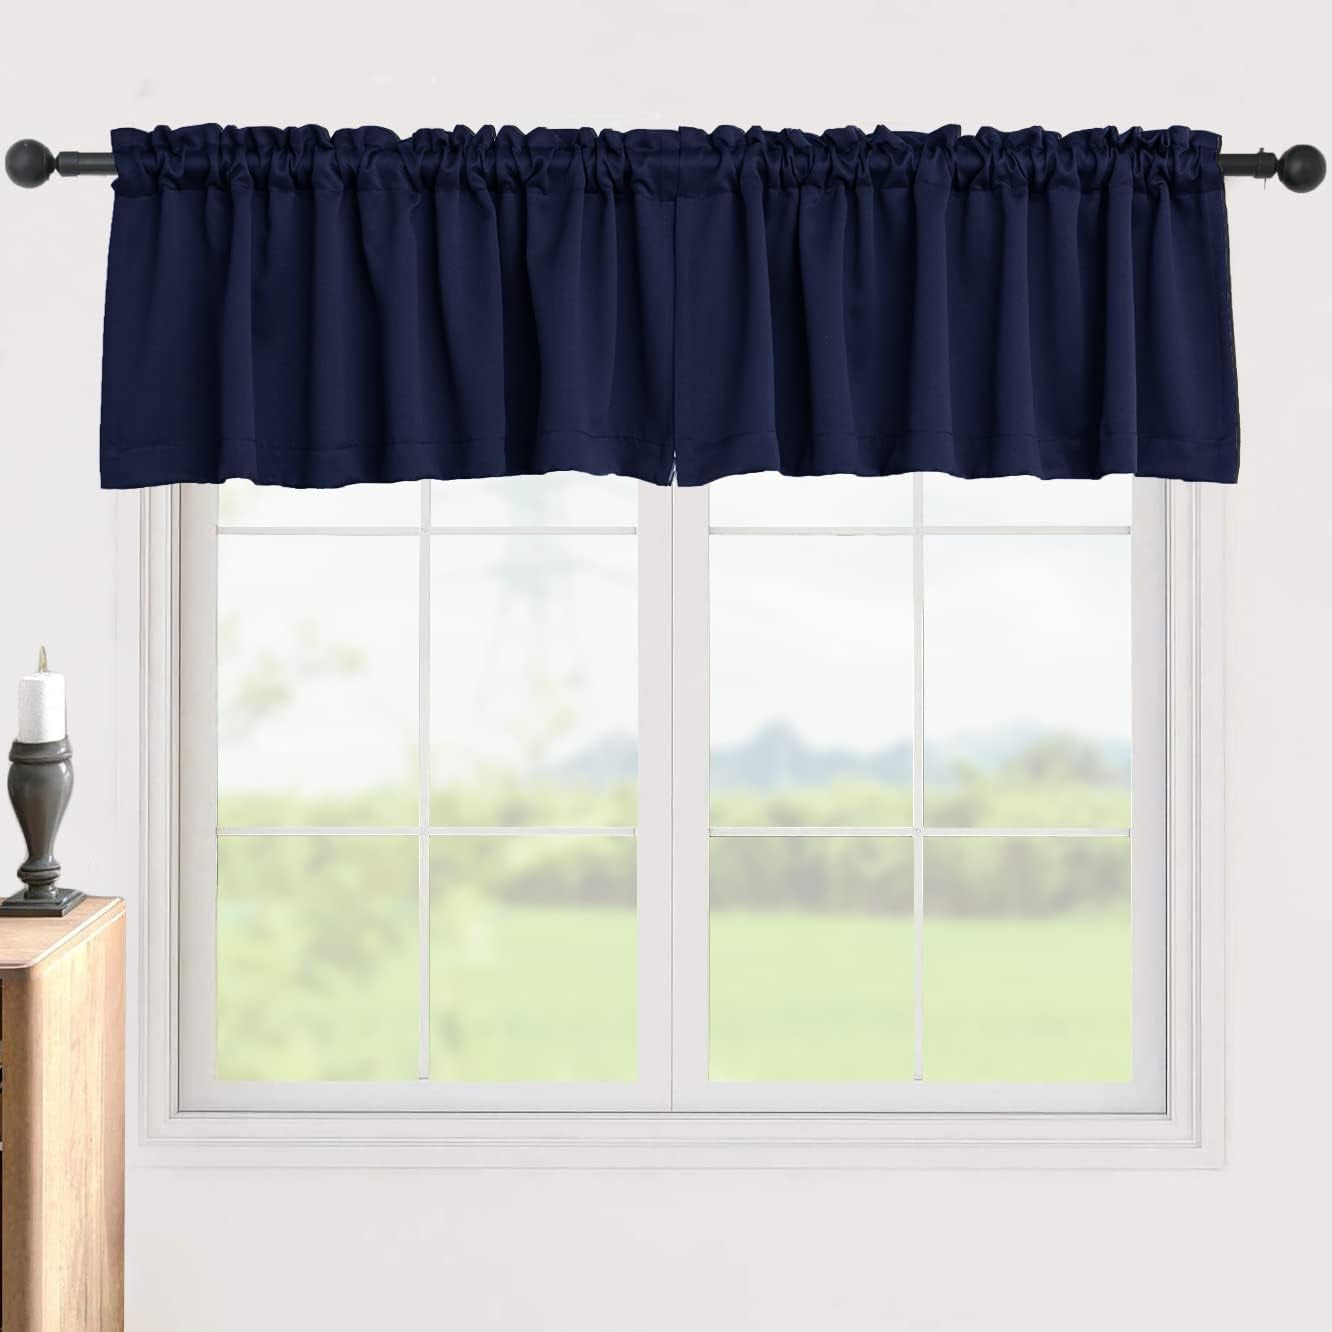 Blackout Valance Curtains 18 Inches Long, Short Curtains with Rod Pocket for Window in Kitchen, Bathroom, Living Room, Bedroom or Basement, 2 Panels, 52" W X 18" L, Teal